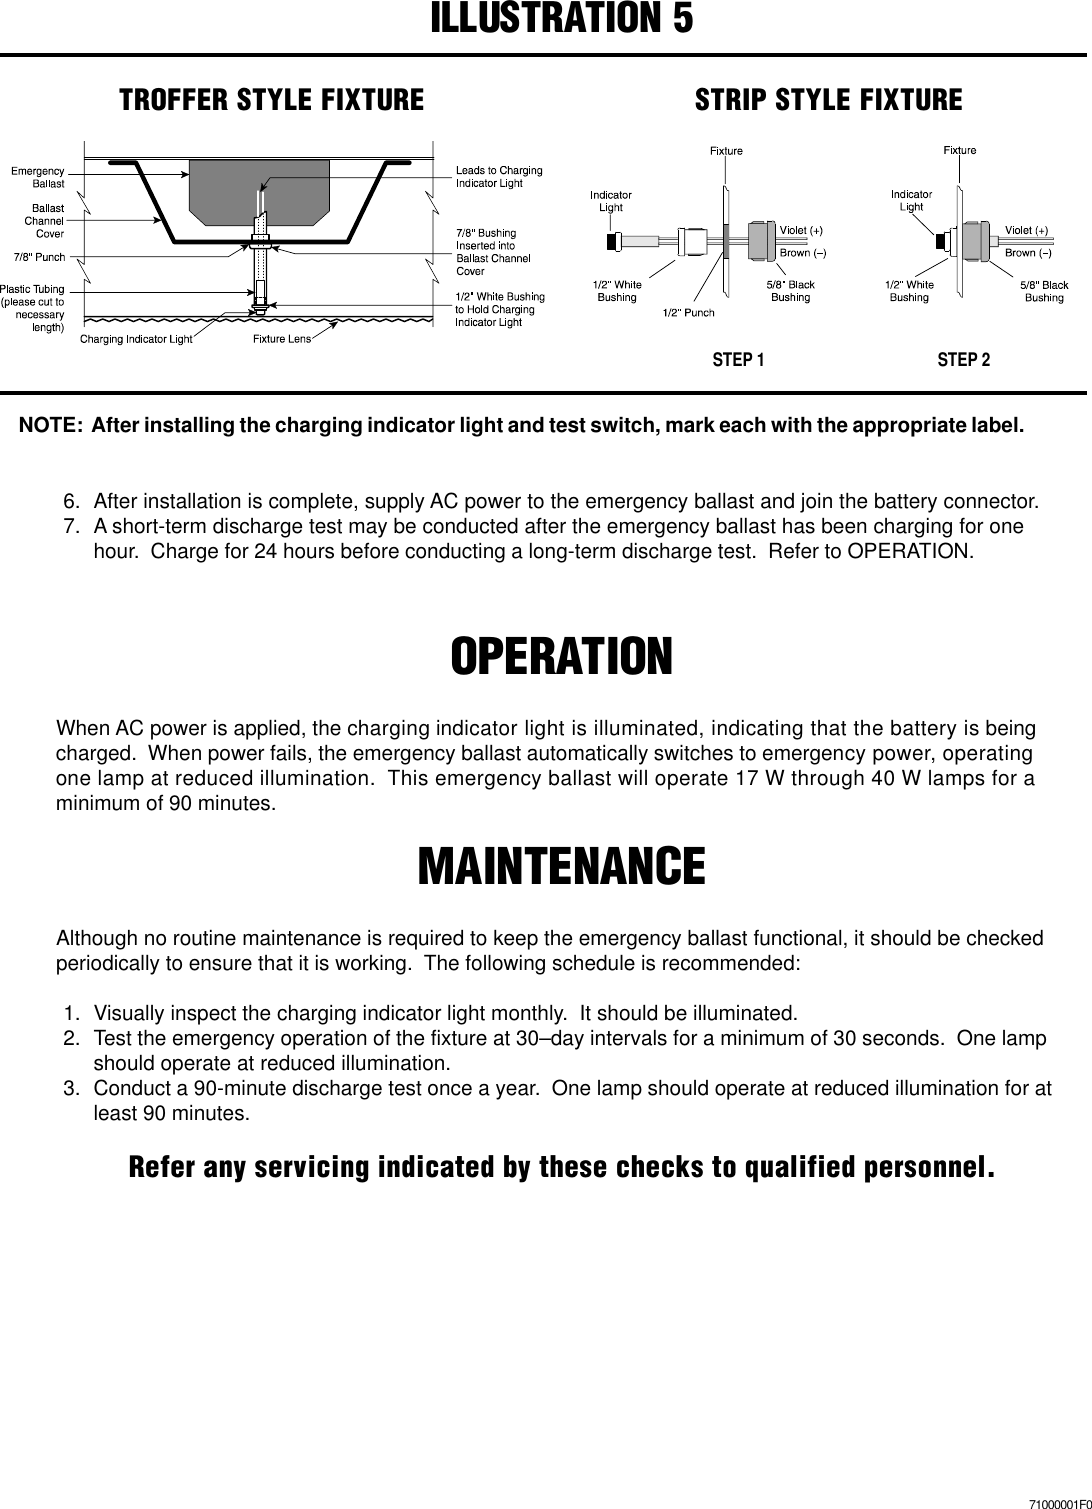 Page 3 of 4 - B100  Installation Directions